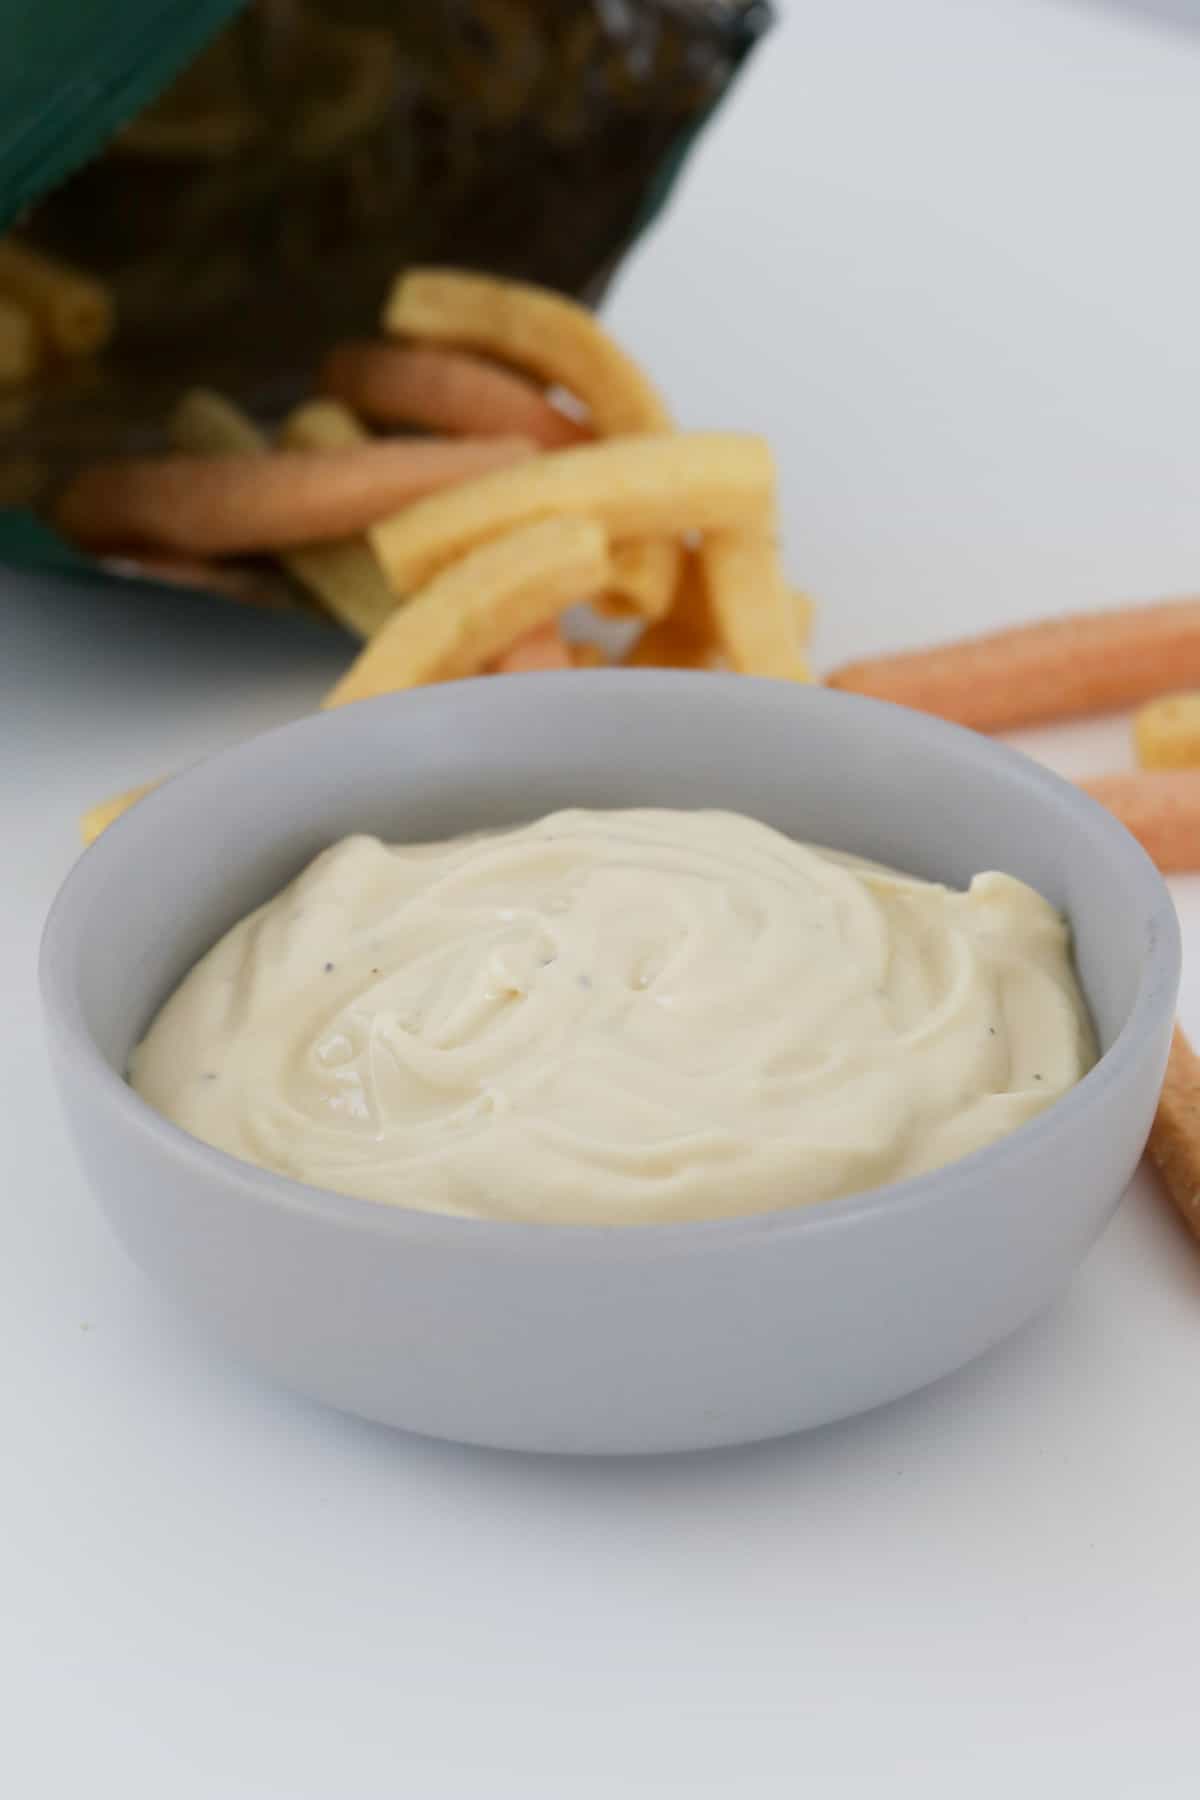 Creamy sauce in a small grey bowl.